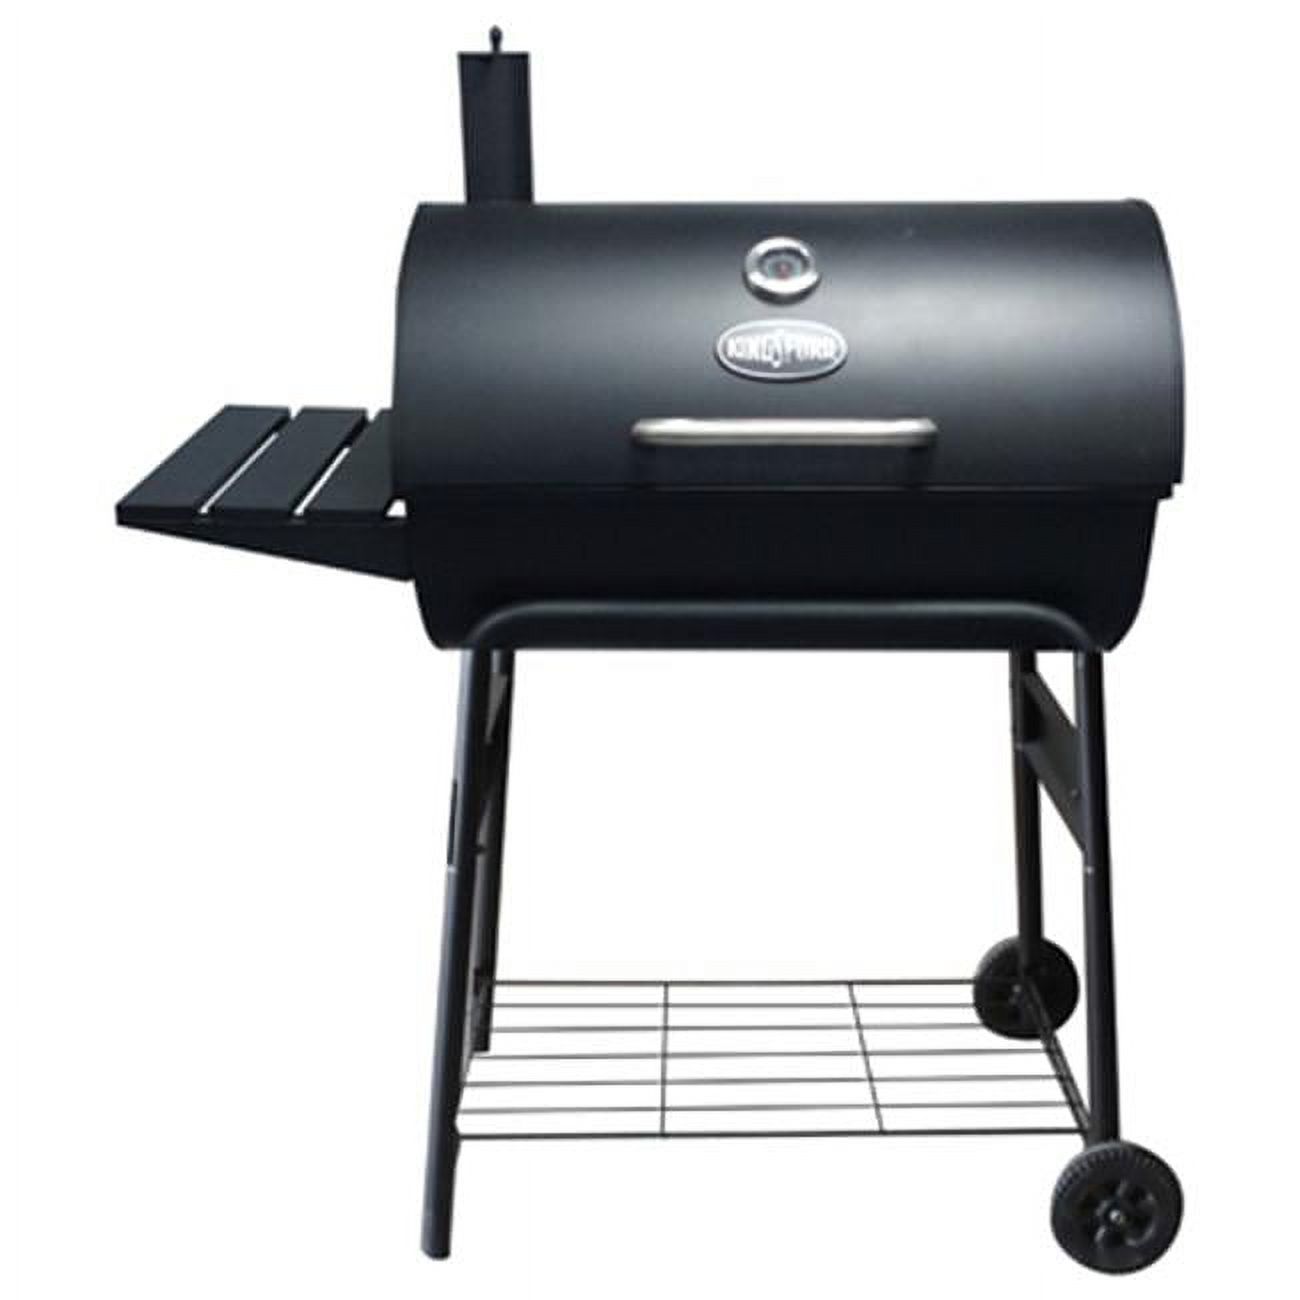 CG2001302-KF Charcoal Barrel Grill, 30-In. - Quantity 1 - image 1 of 2